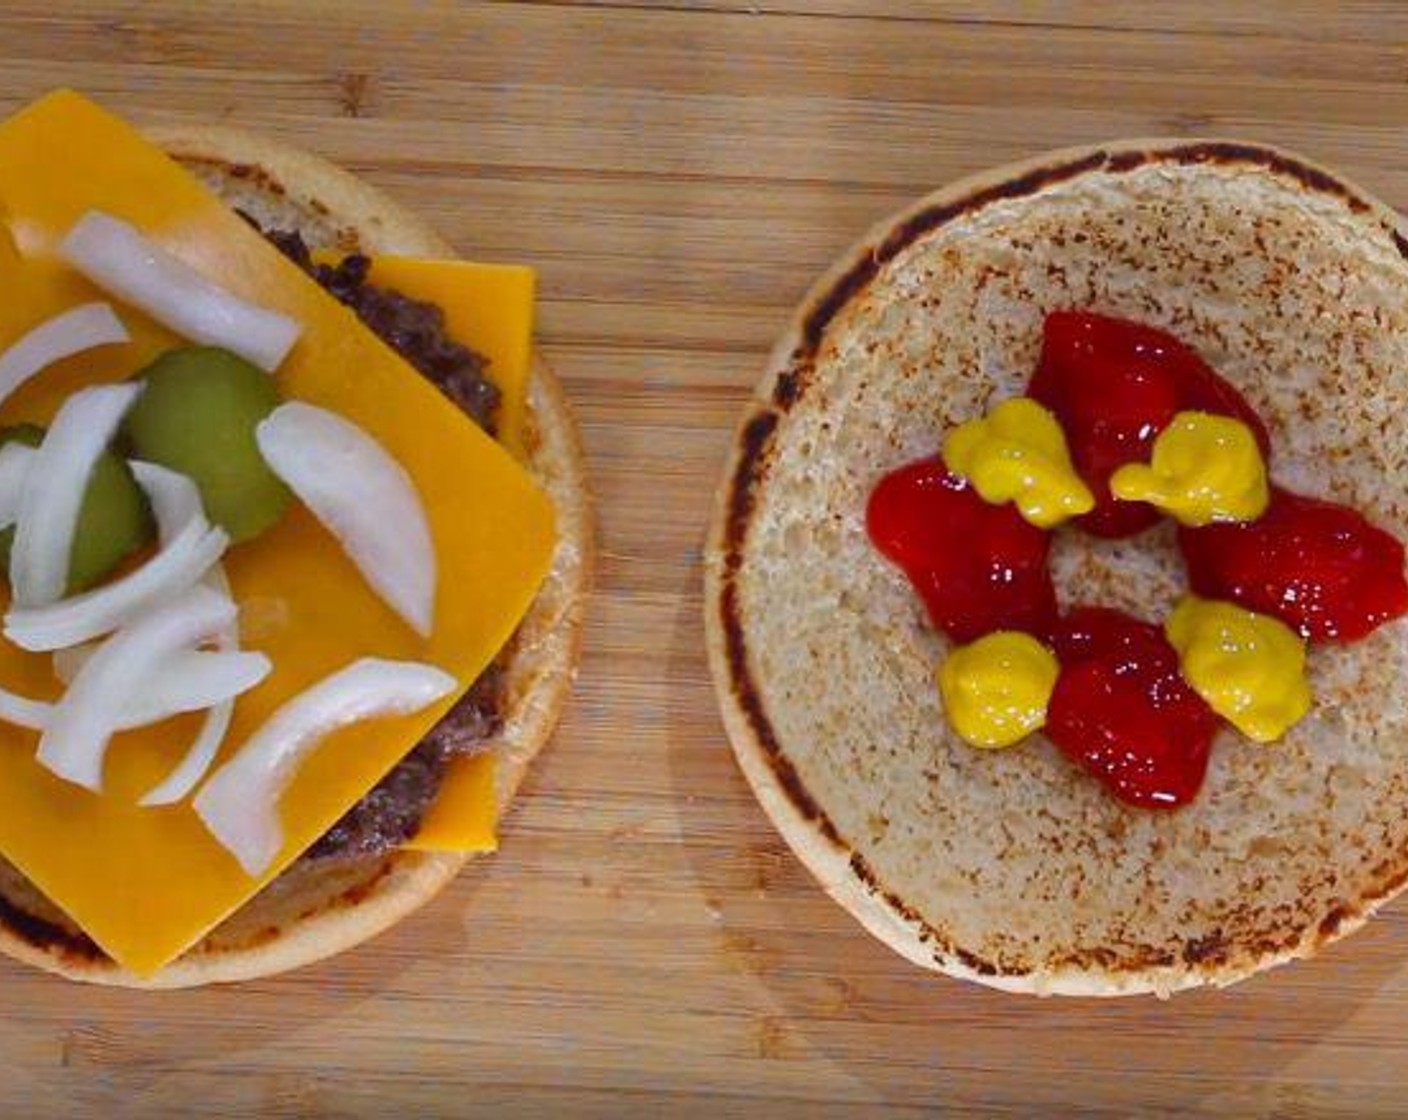 step 4 To assemble, lay out Sesame Hamburger Buns (4). On the heel bun, layer one slice of American Cheese Slices (8), beef patty, the other slice of cheese, two Pickles (8 slices), and Onions (to taste). On the crown bun, add Ketchup (to taste) and Yellow Mustard (to taste).